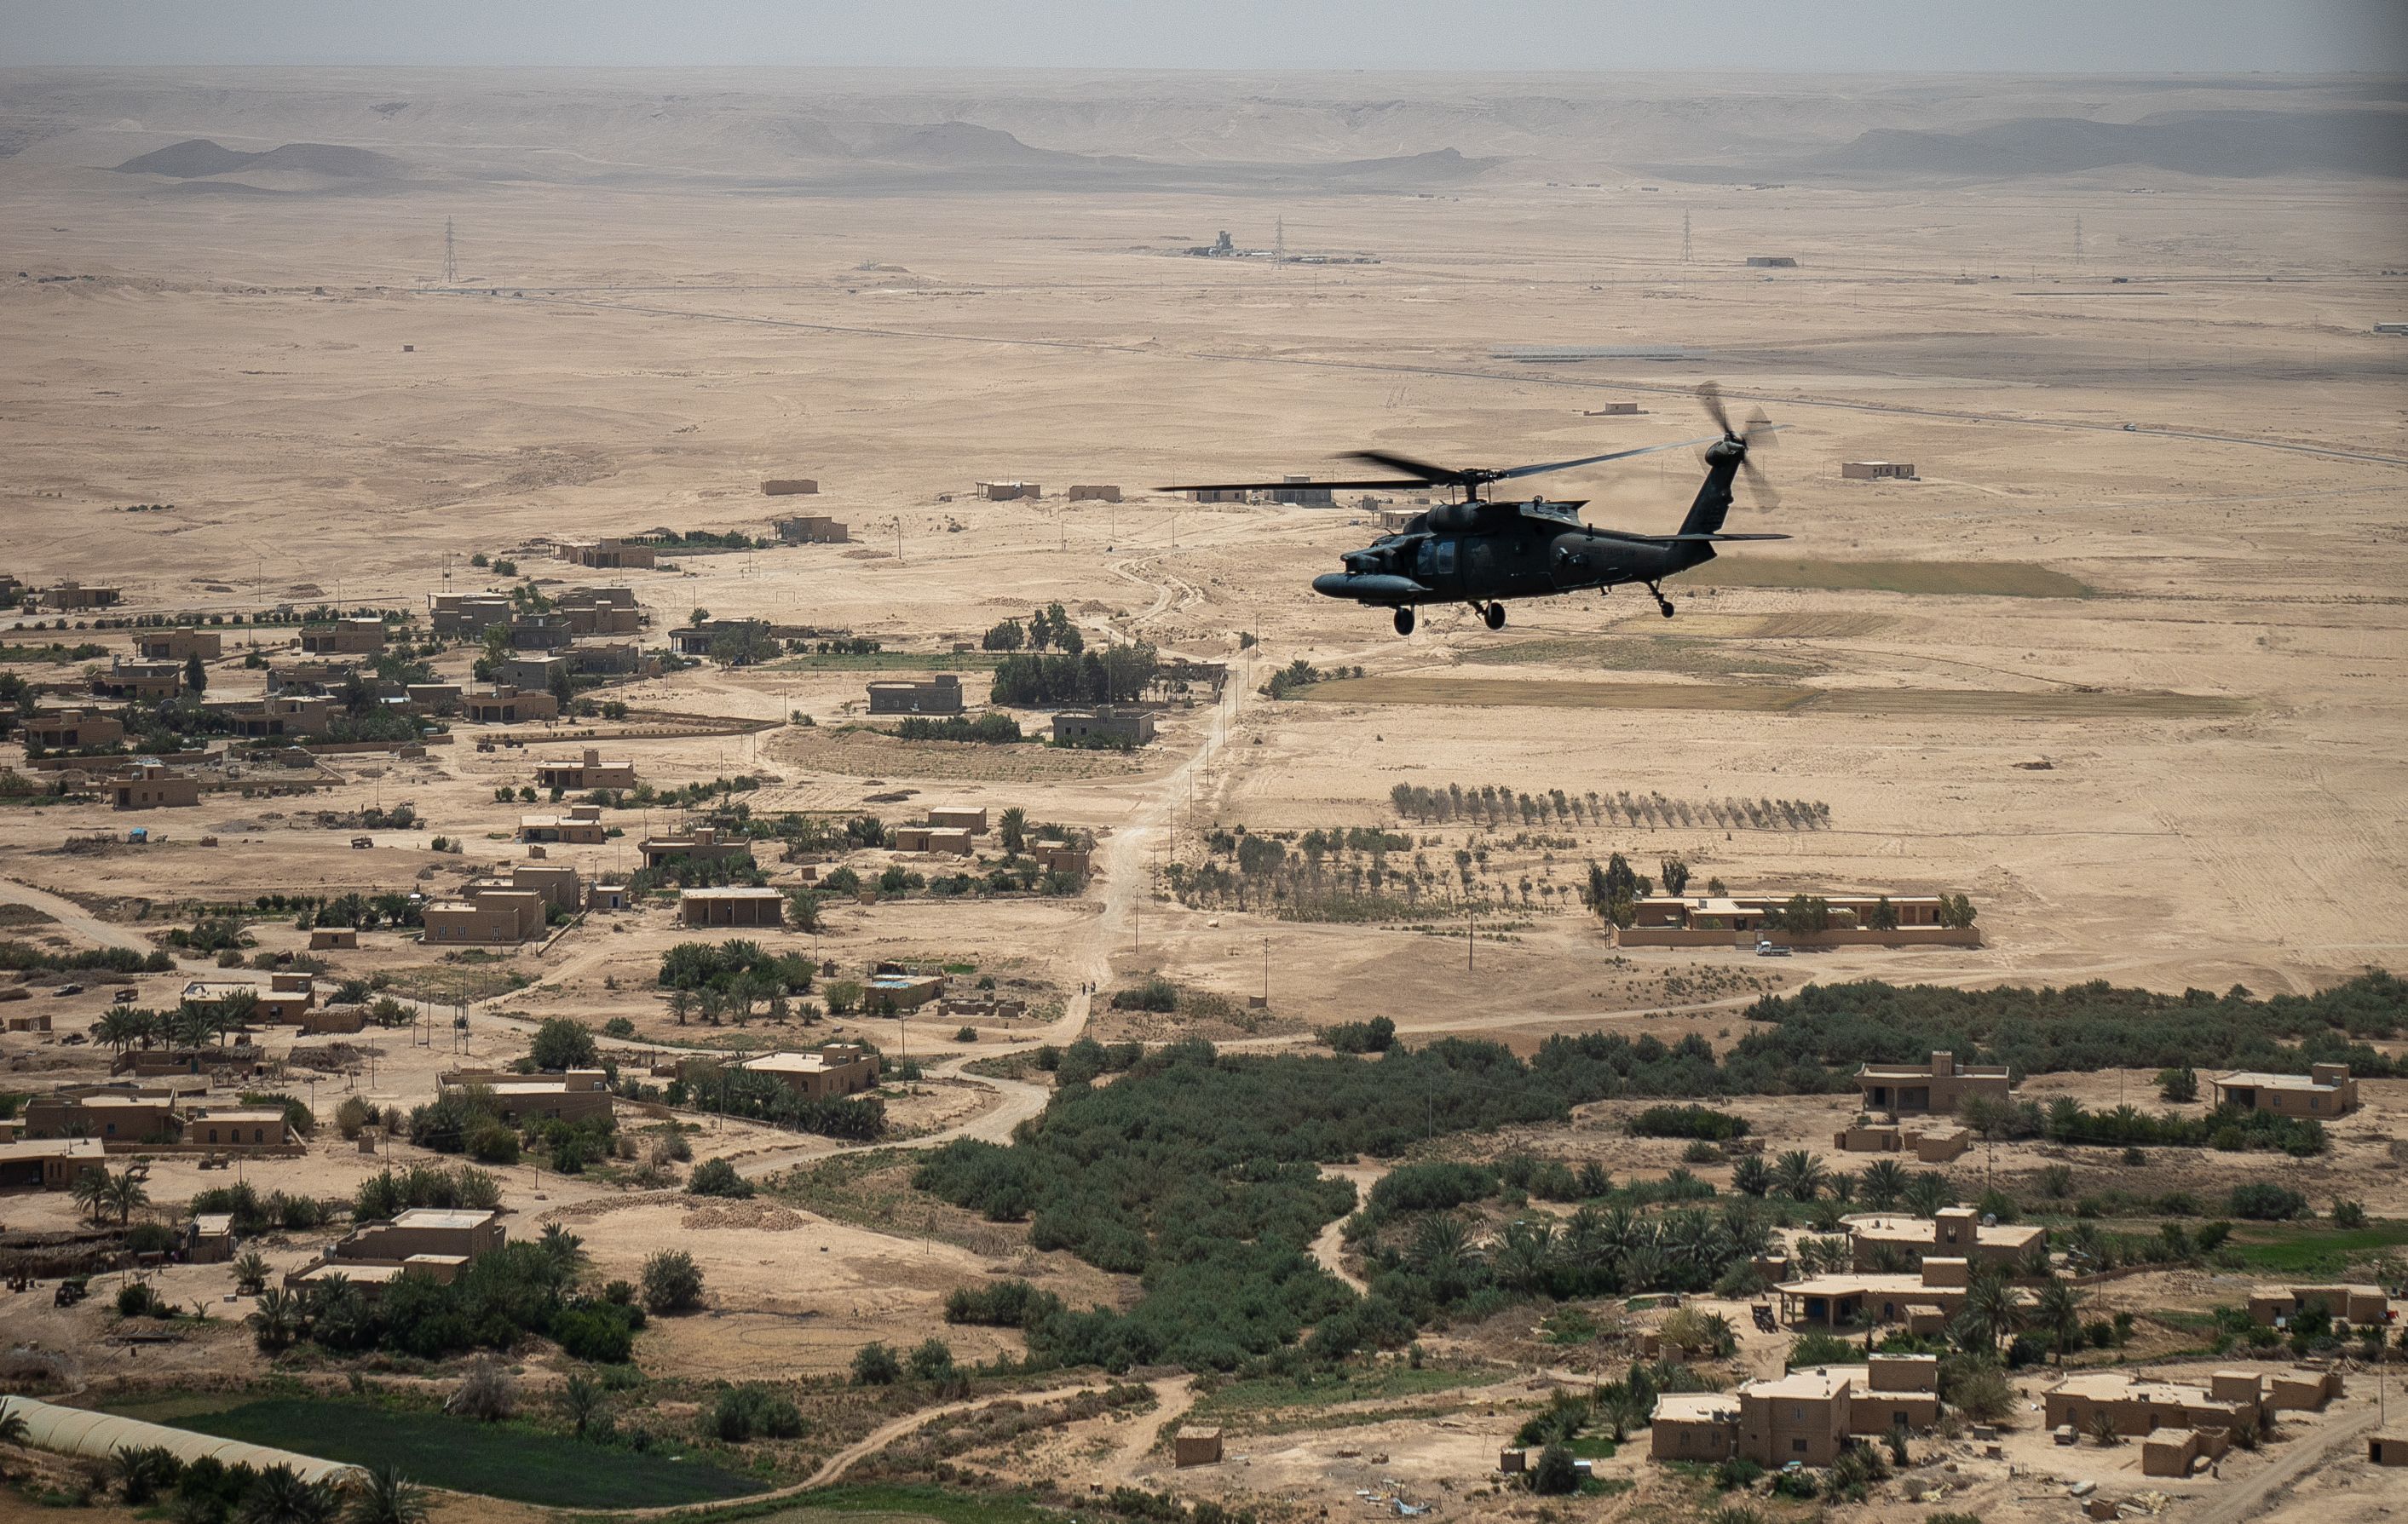 A UH-60 Black Hawk with 7th General Support Aviation Battalion, 158th Aviation Regiment, 11th Combat Aviation Brigade (CAB) flies during a mission in the U.S. Central Command area of operations, June 6, 2022. 11th CAB, mobilized as Task Force Eagle, is deployed in support of the Combined Joint Task Force